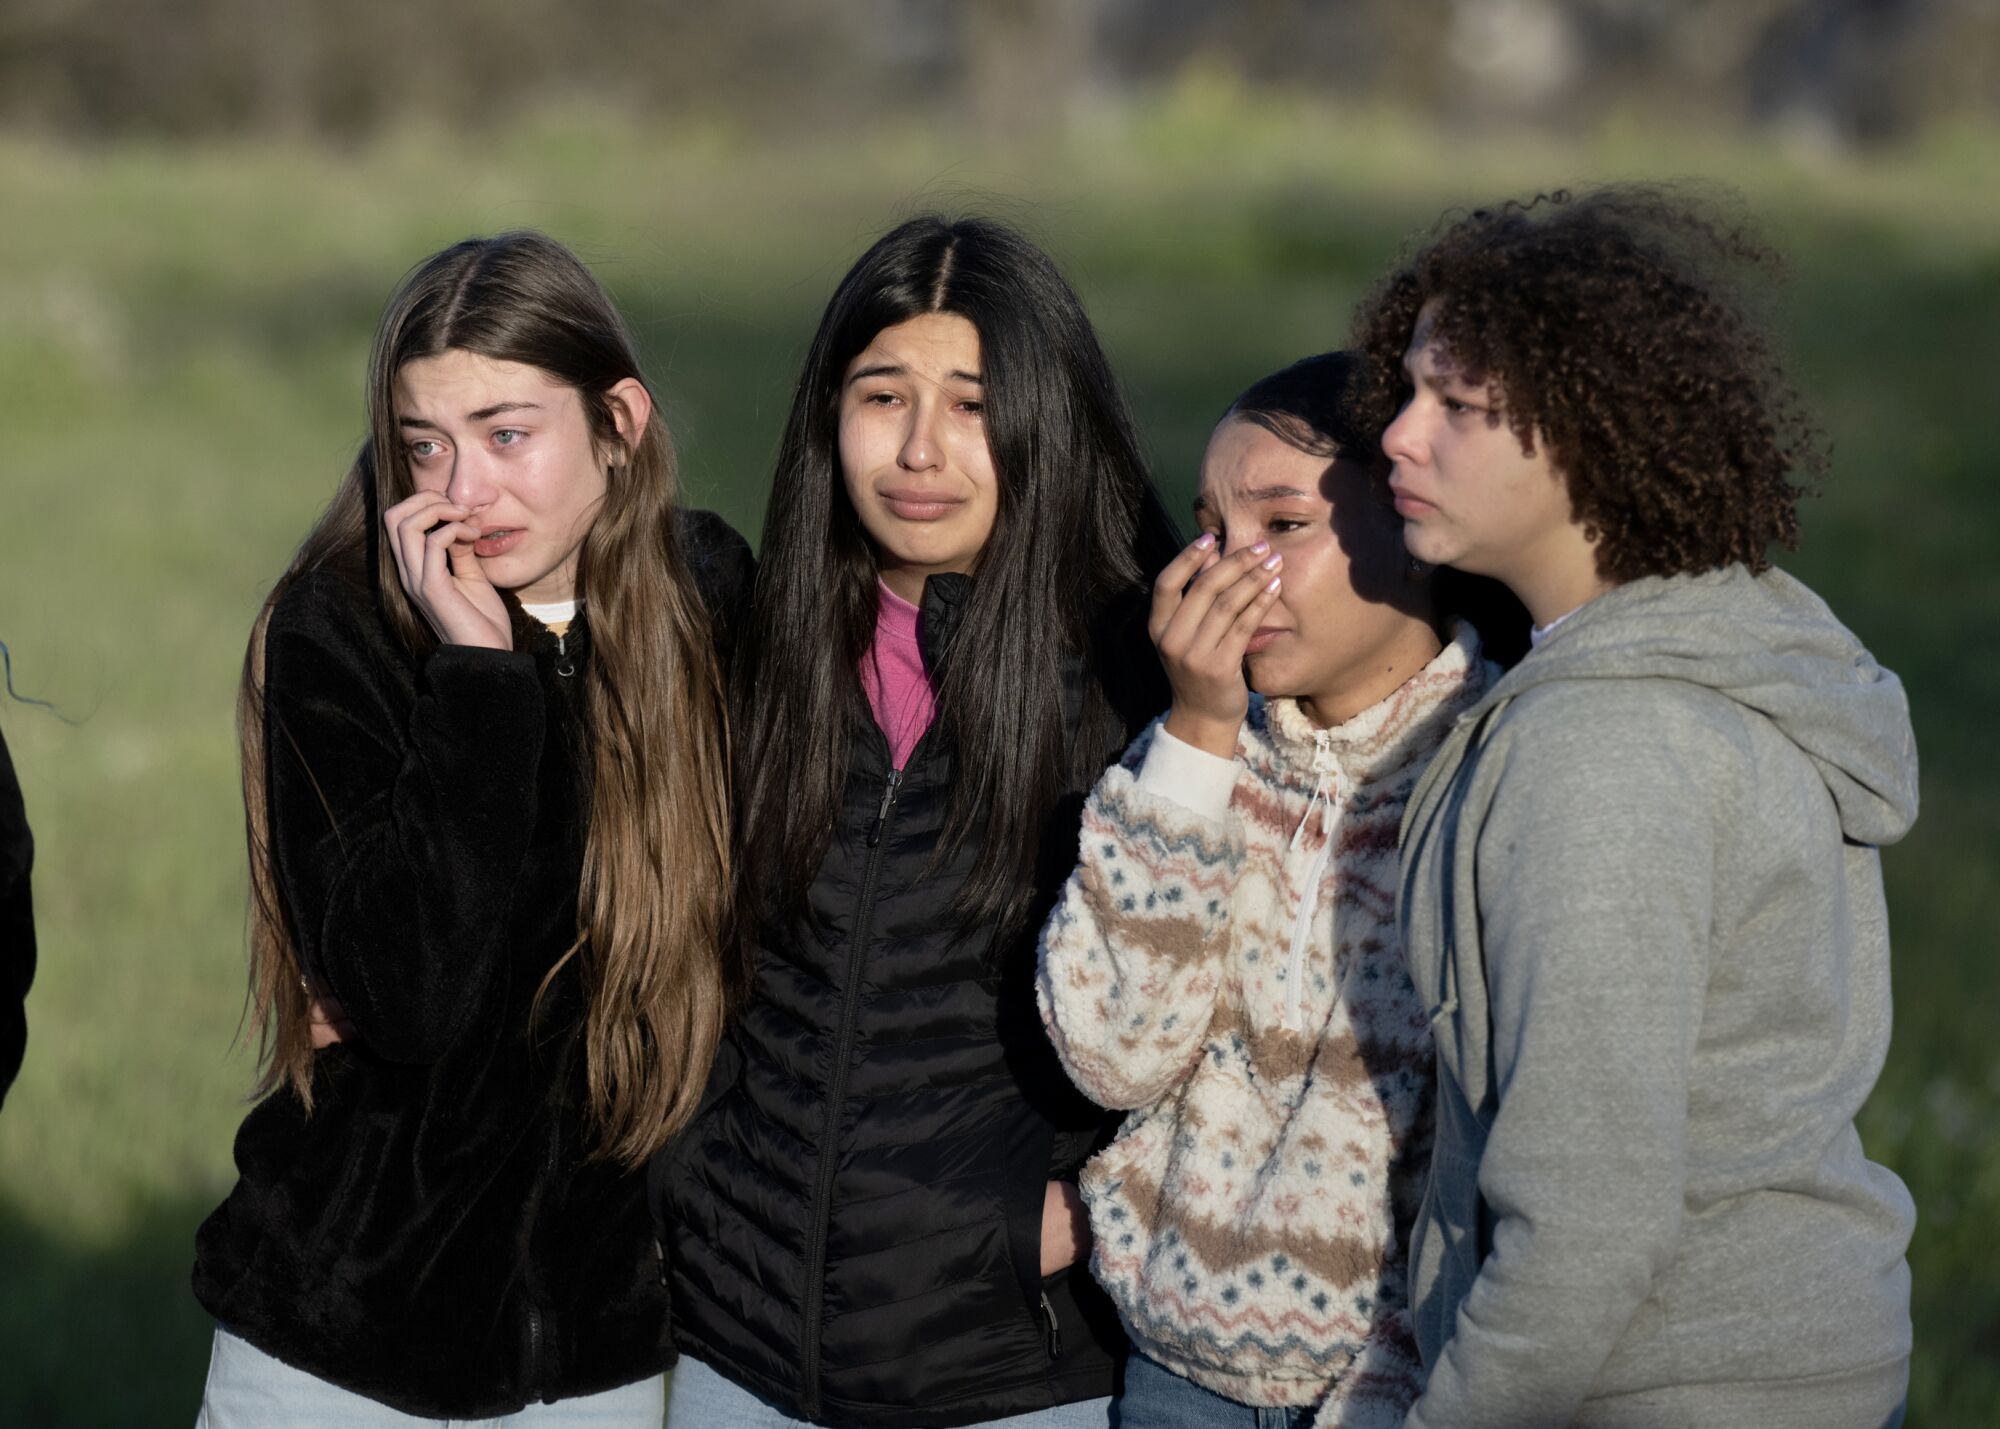 Four teen girls embrace one another while grieving during a memorial service.